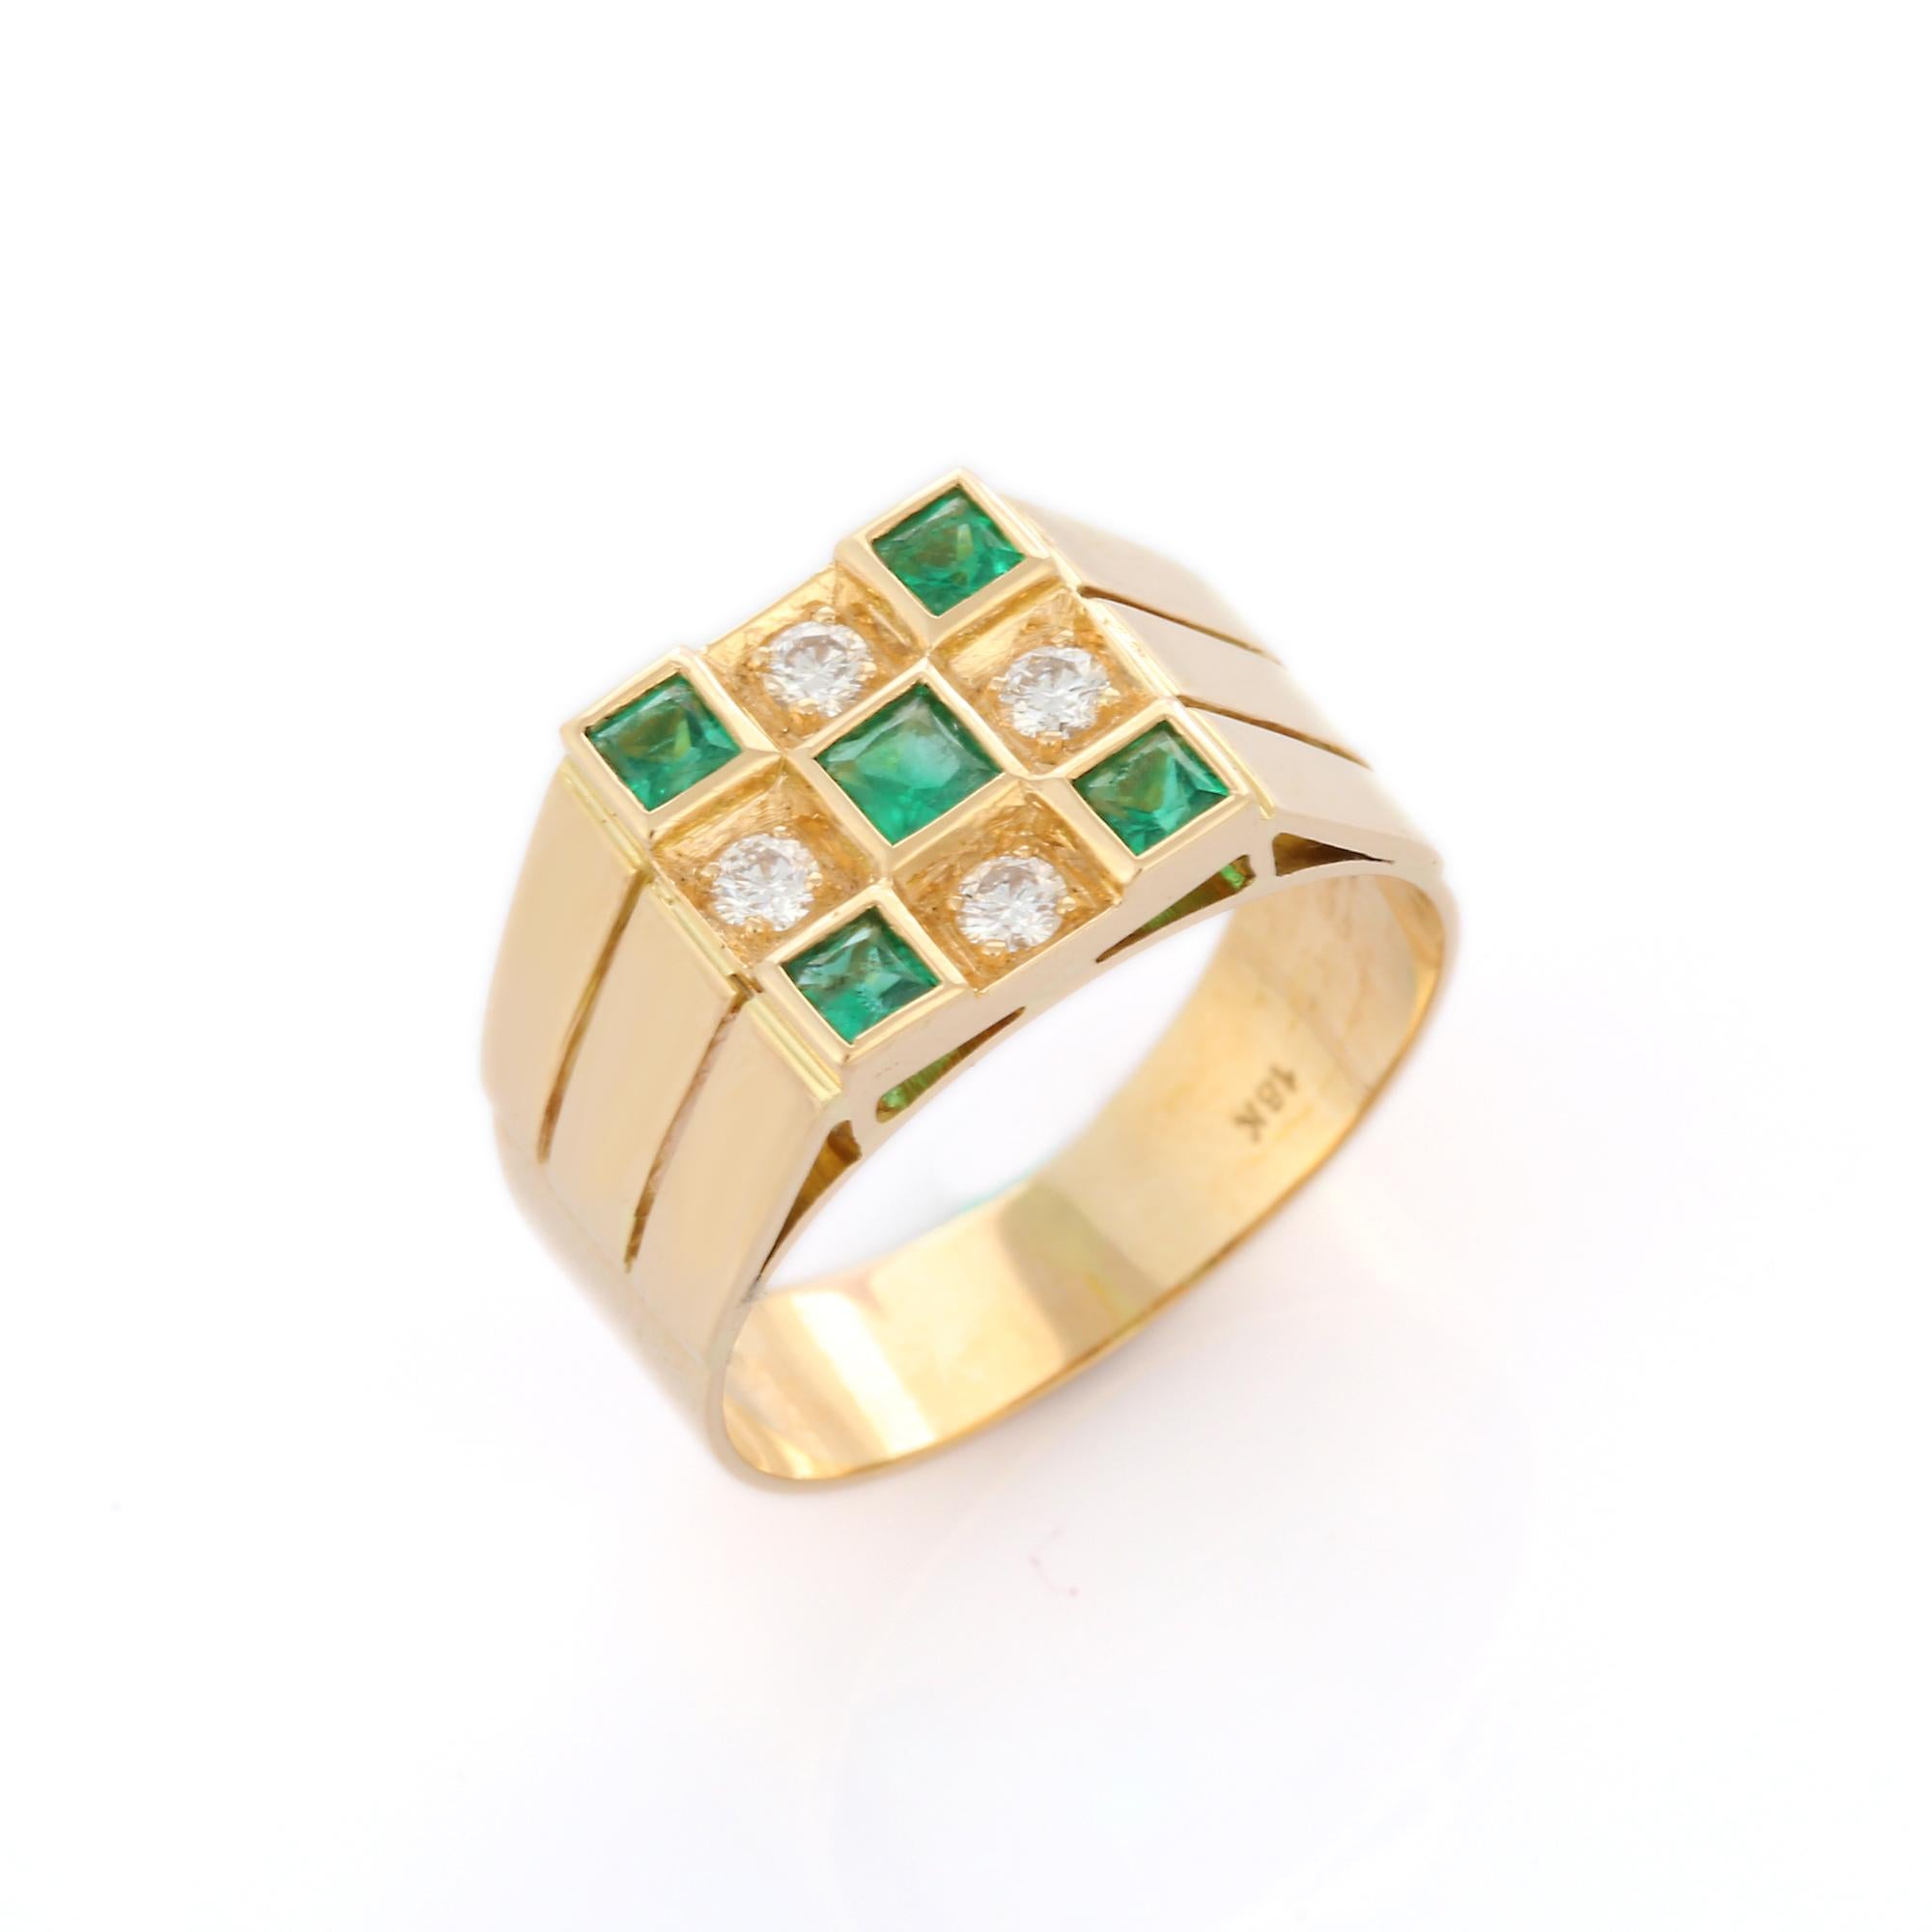 For Sale:  Natural Emerald and Diamond Engagement Ring in 18k Yellow Gold Ring for Father 2